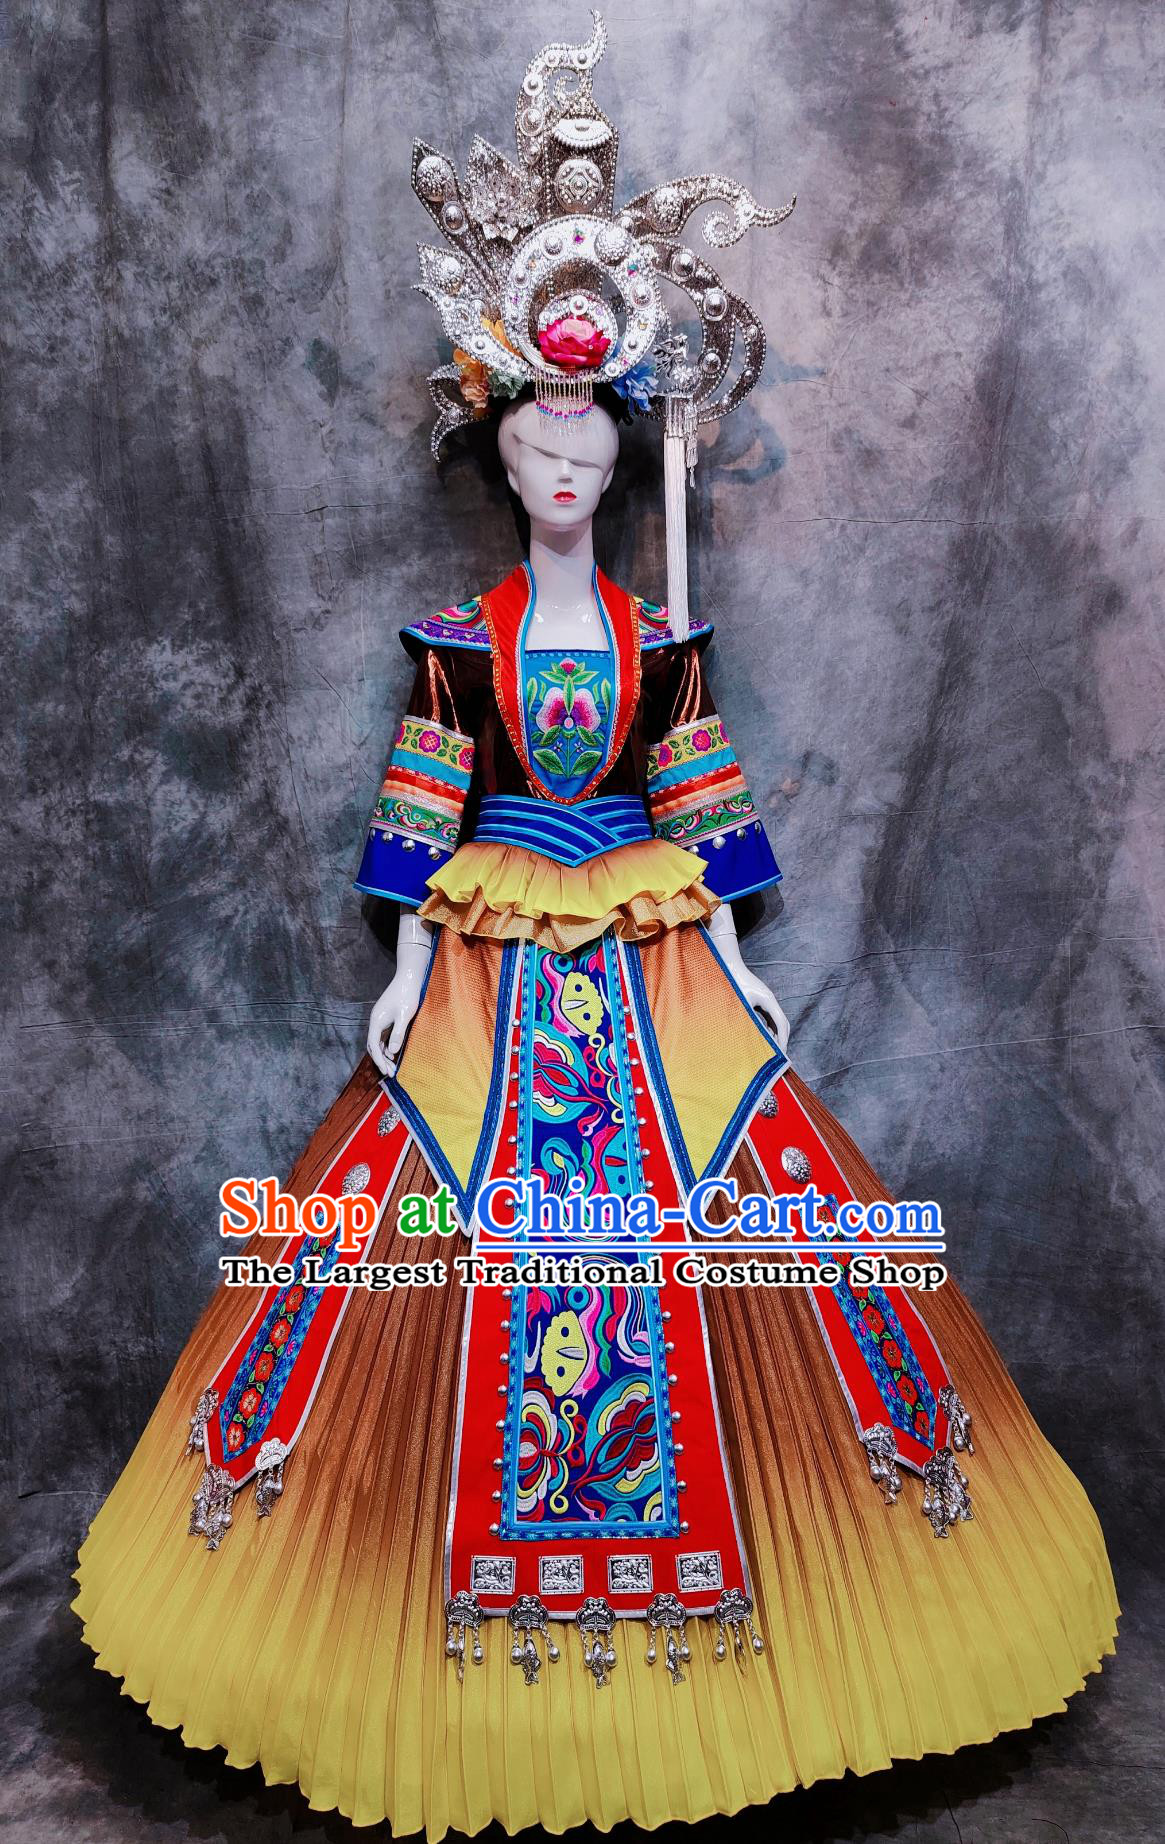 Chinese Ethnic Dance Performance Costume China Dong National Minority Woman Clothing Traditional Guizhou March 3rd Festival Dress